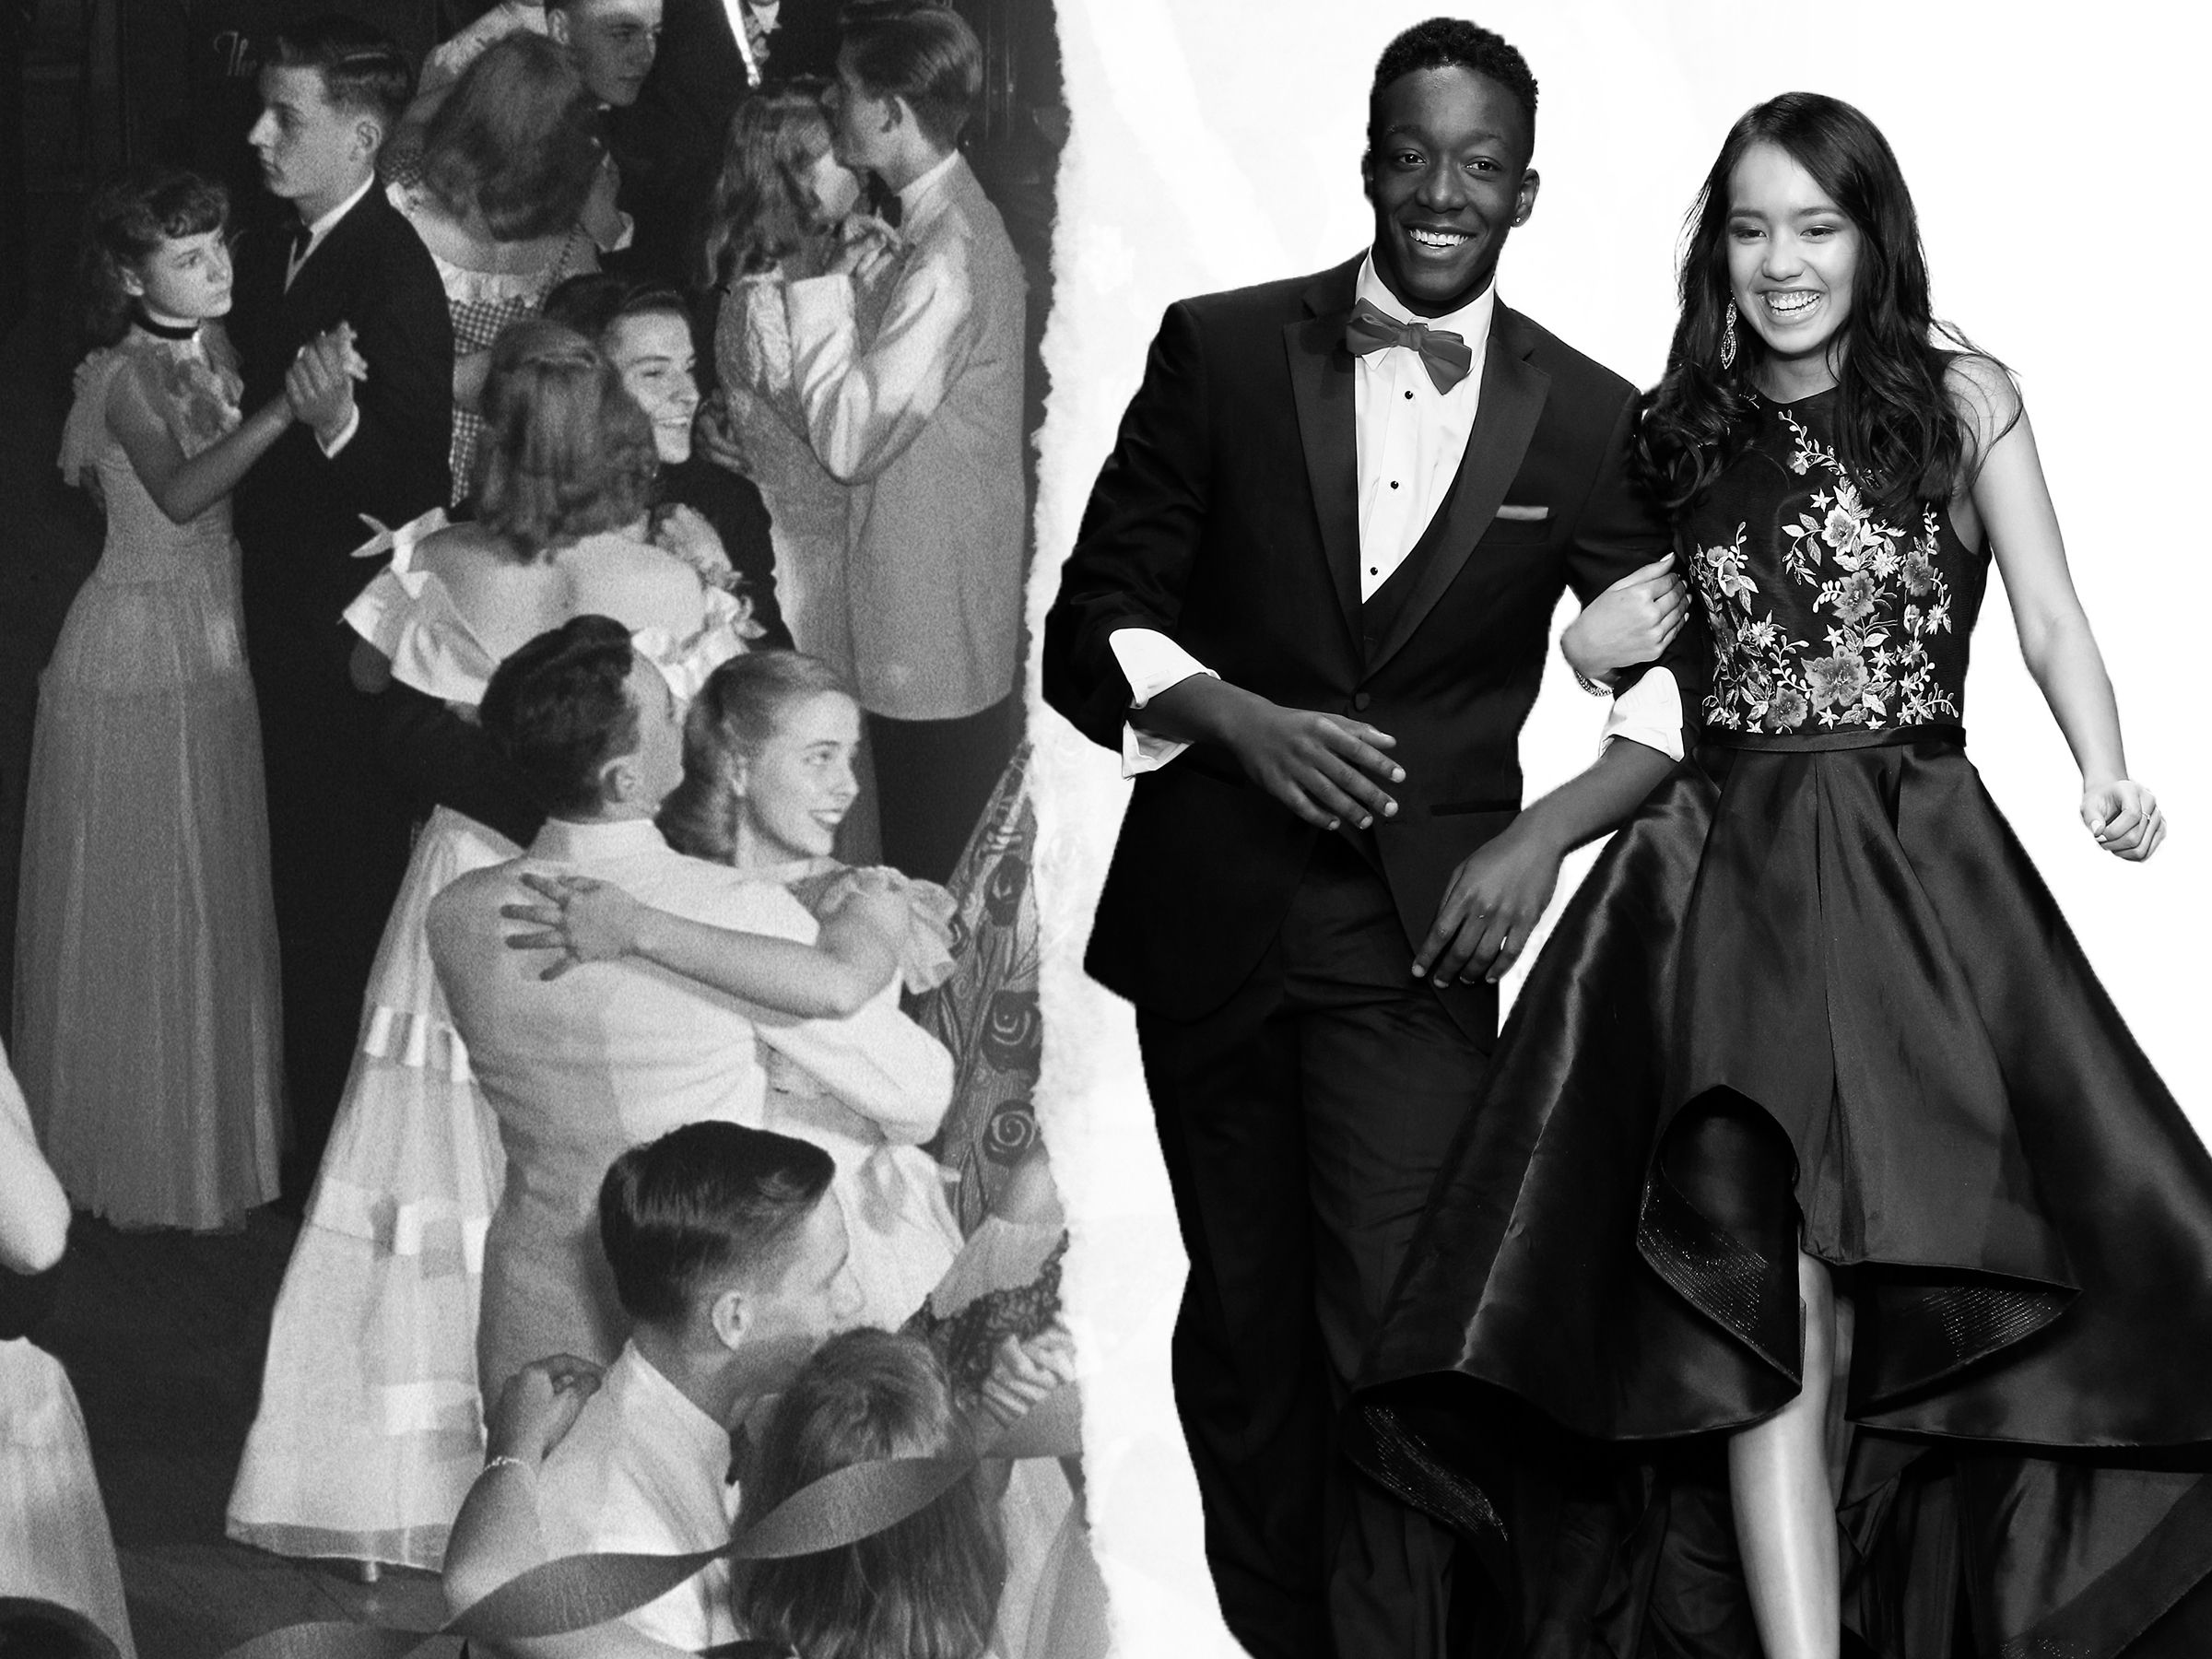 Party Like It's 1899: What It's Like Growing Up With a Segregated Prom